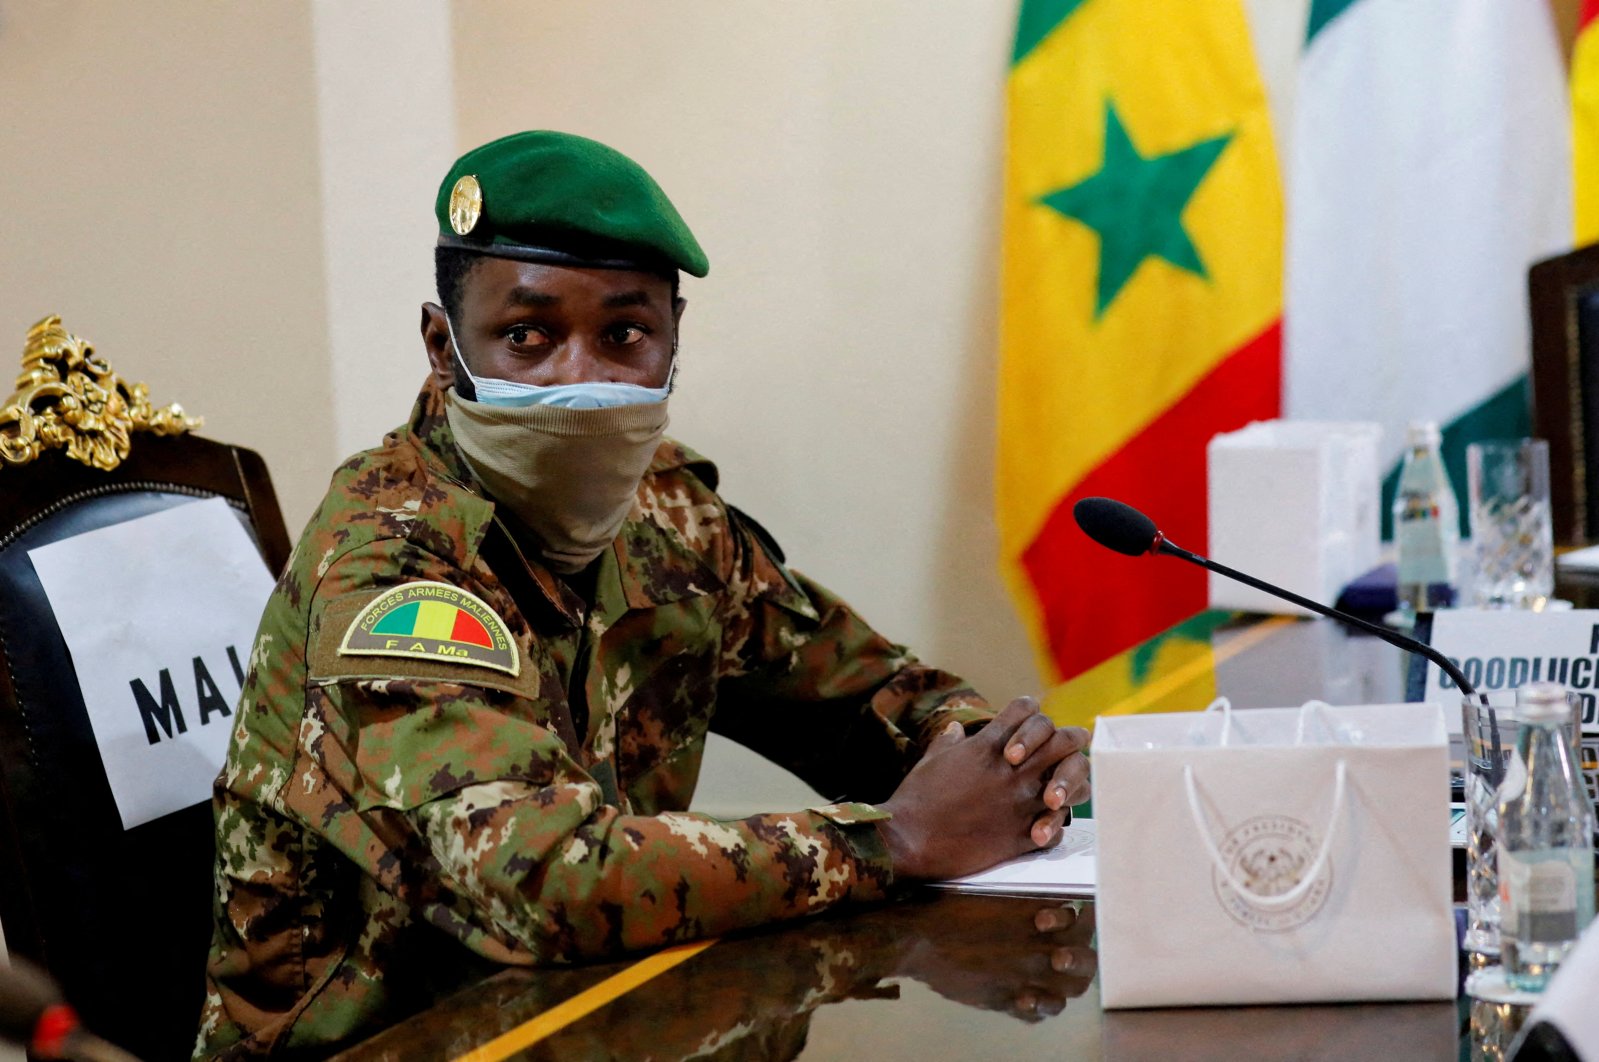 Col. Assimi Goita, leader of the Malian military junta, attends an Economic Community of West African States (ECOWAS) consultative meeting in Accra, Ghana, Sept. 15, 2020. (Reuters Photo)